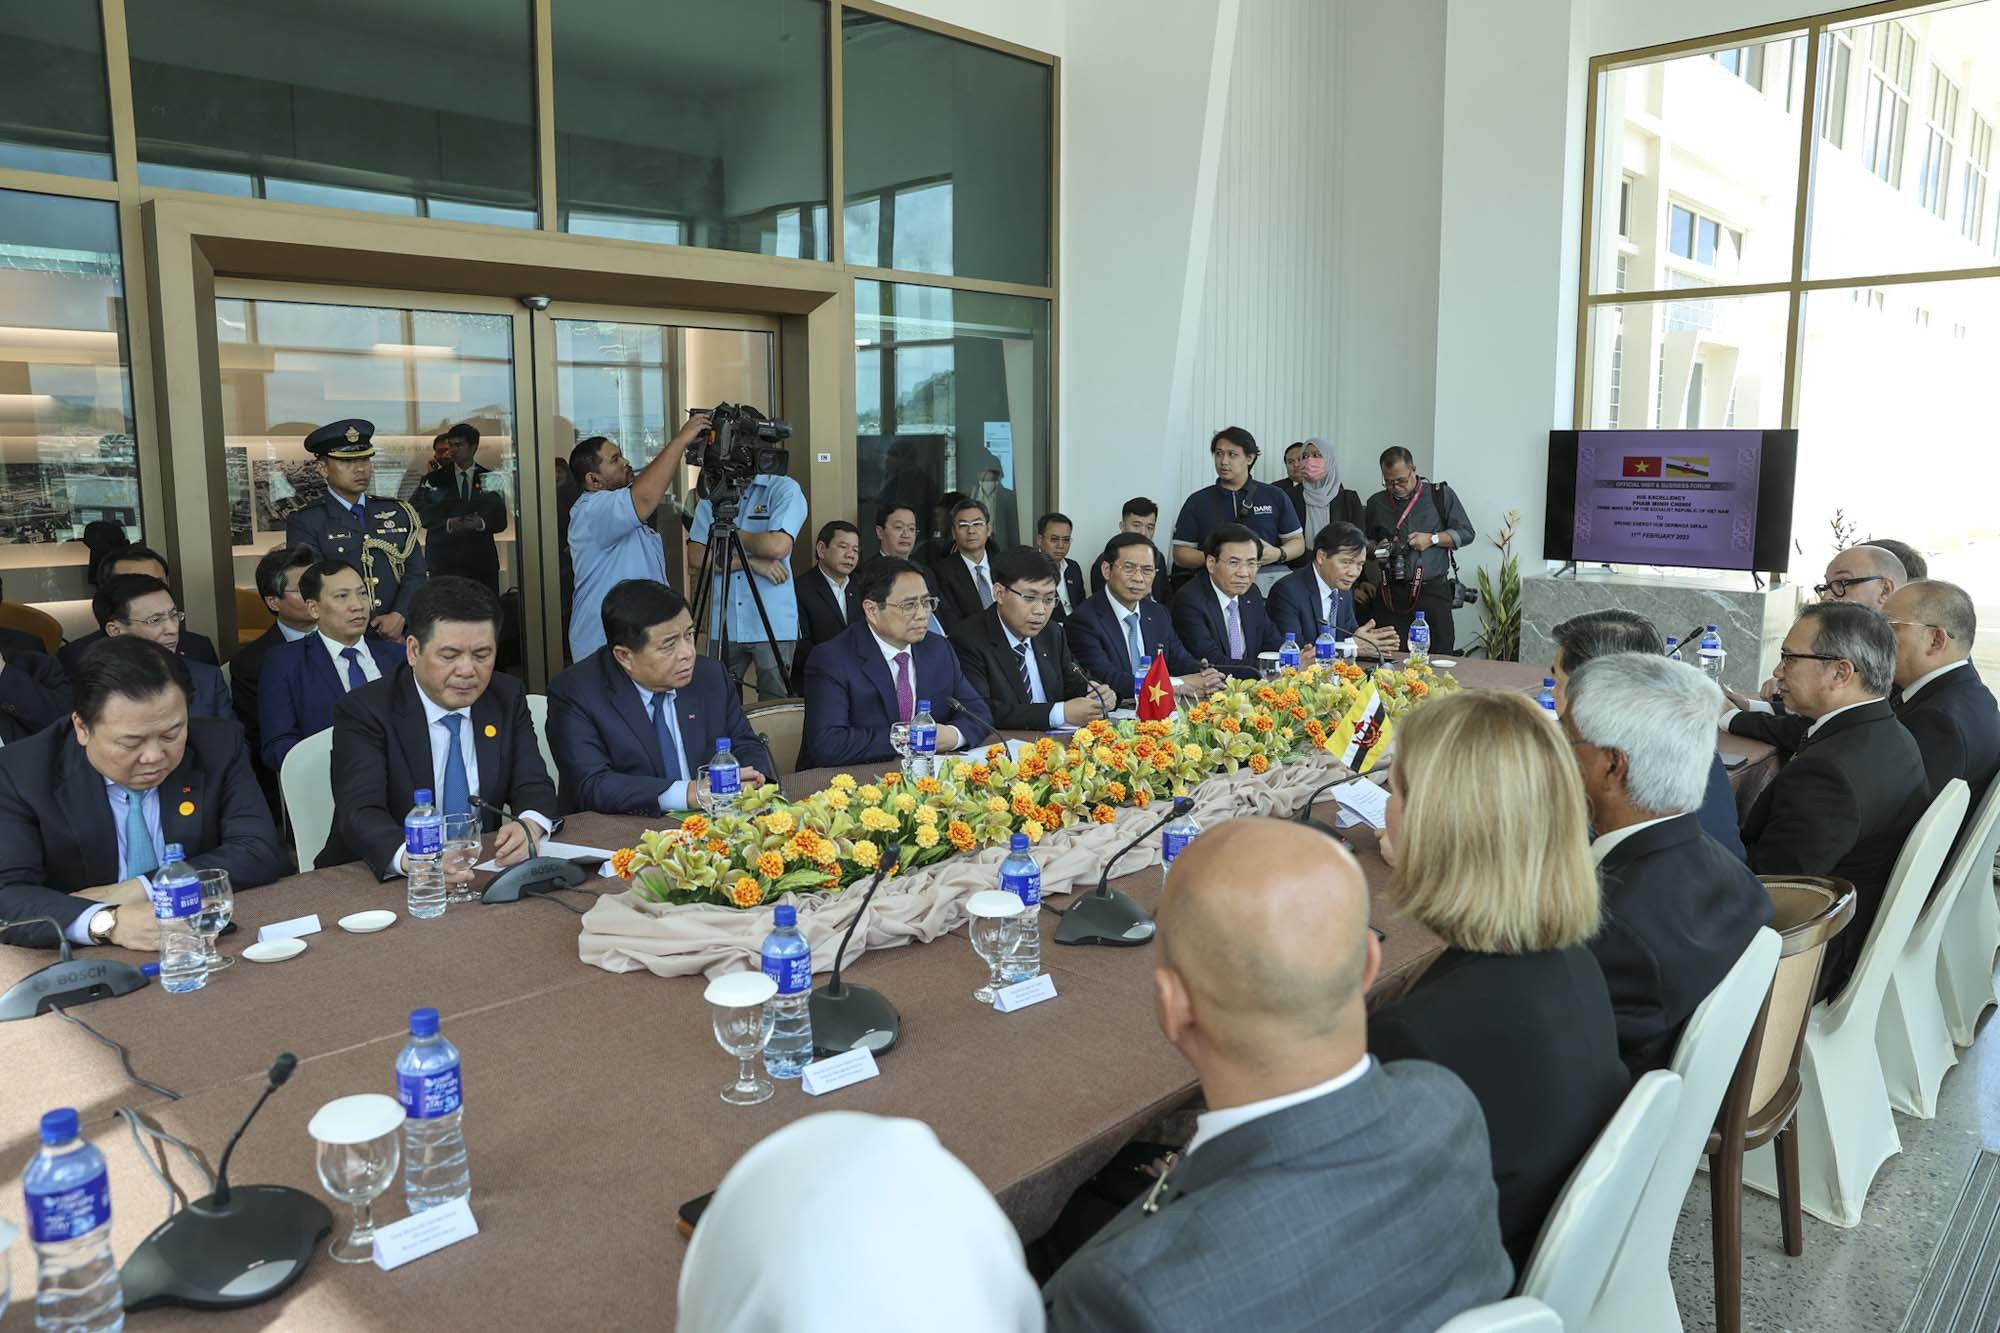 Prime Minister held roundtable discussion with Brunei energy, oil and gas firms